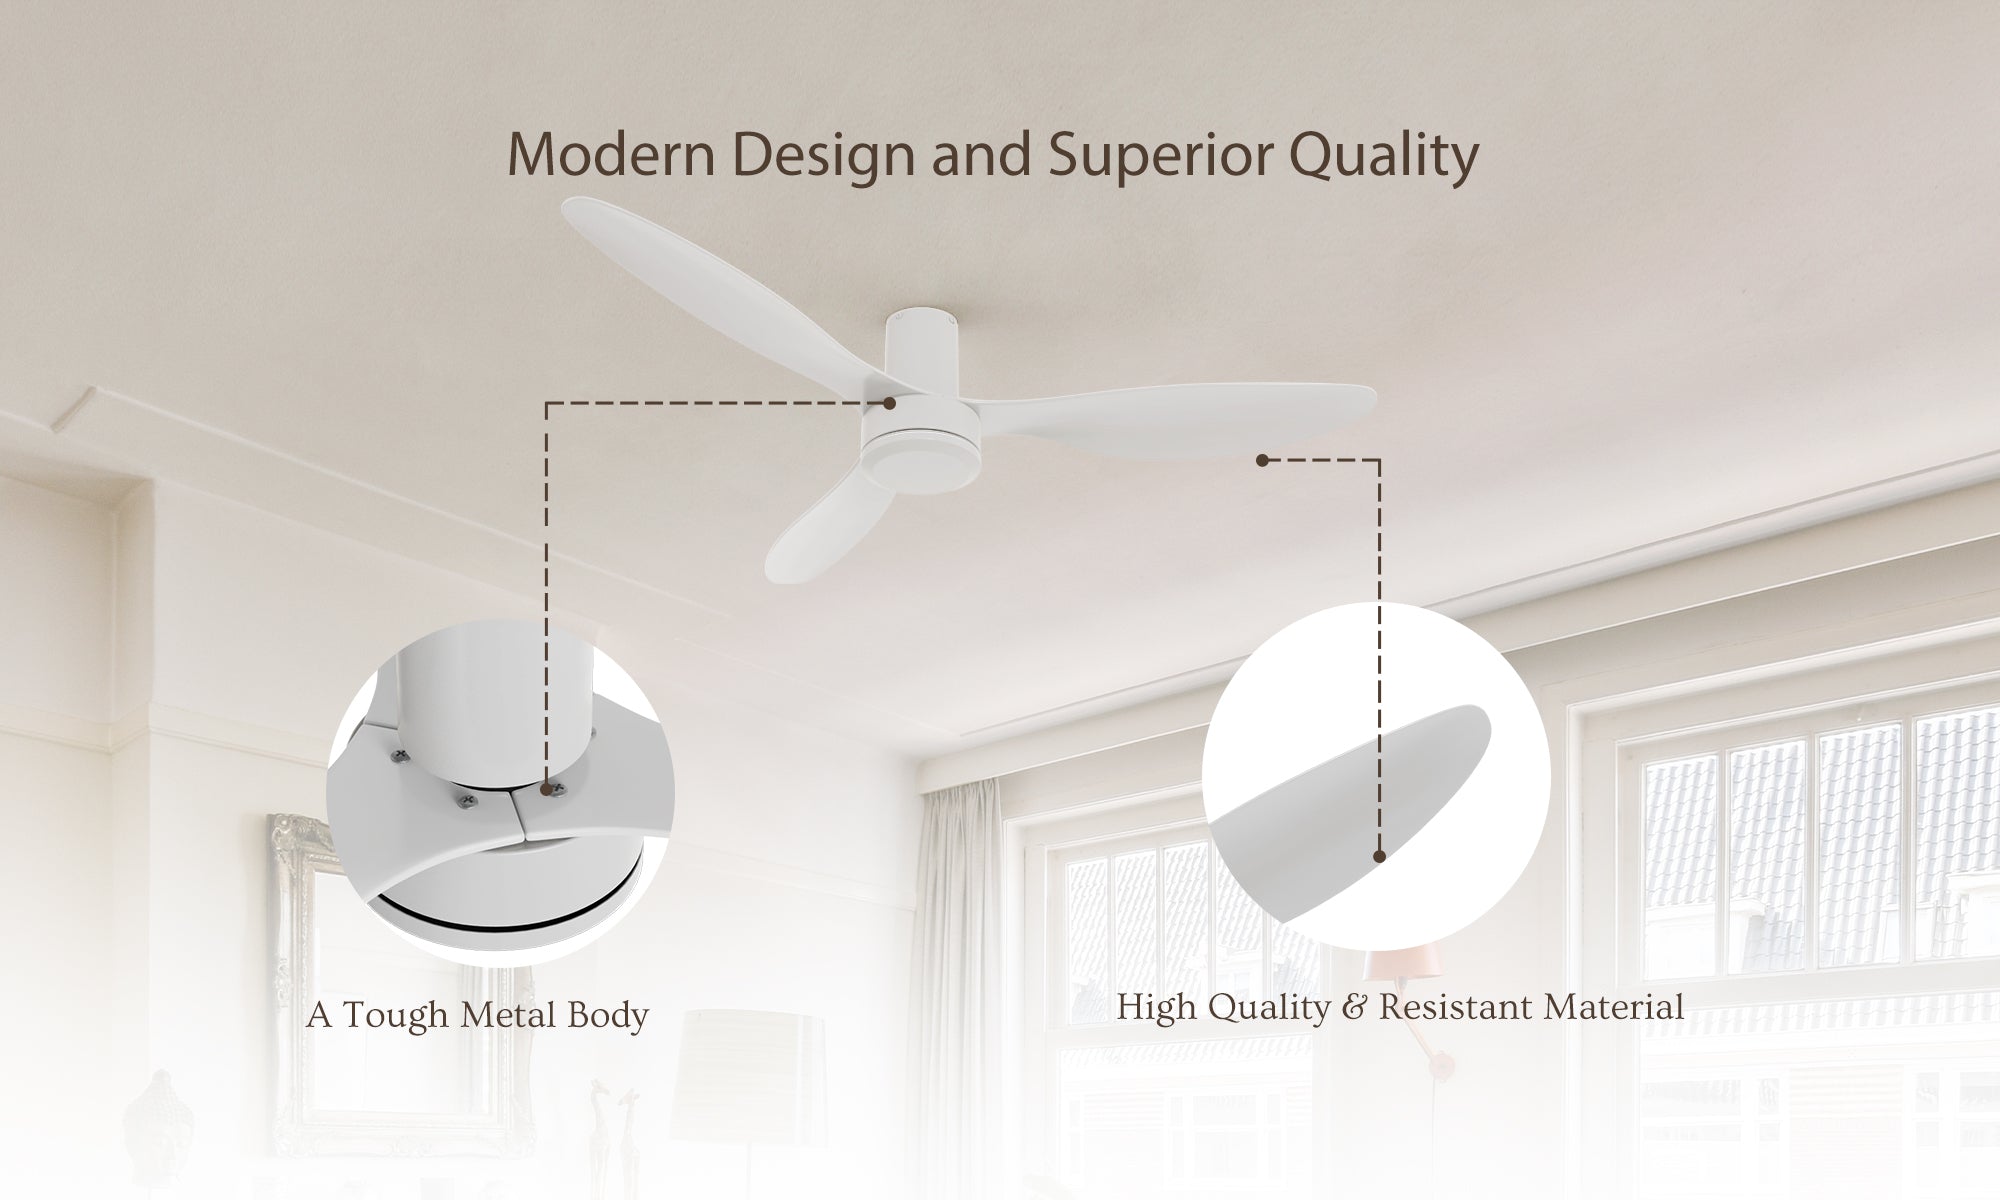 52-inch downrod mounting ceiling fan with a tough metal body and resistant plywood blades.